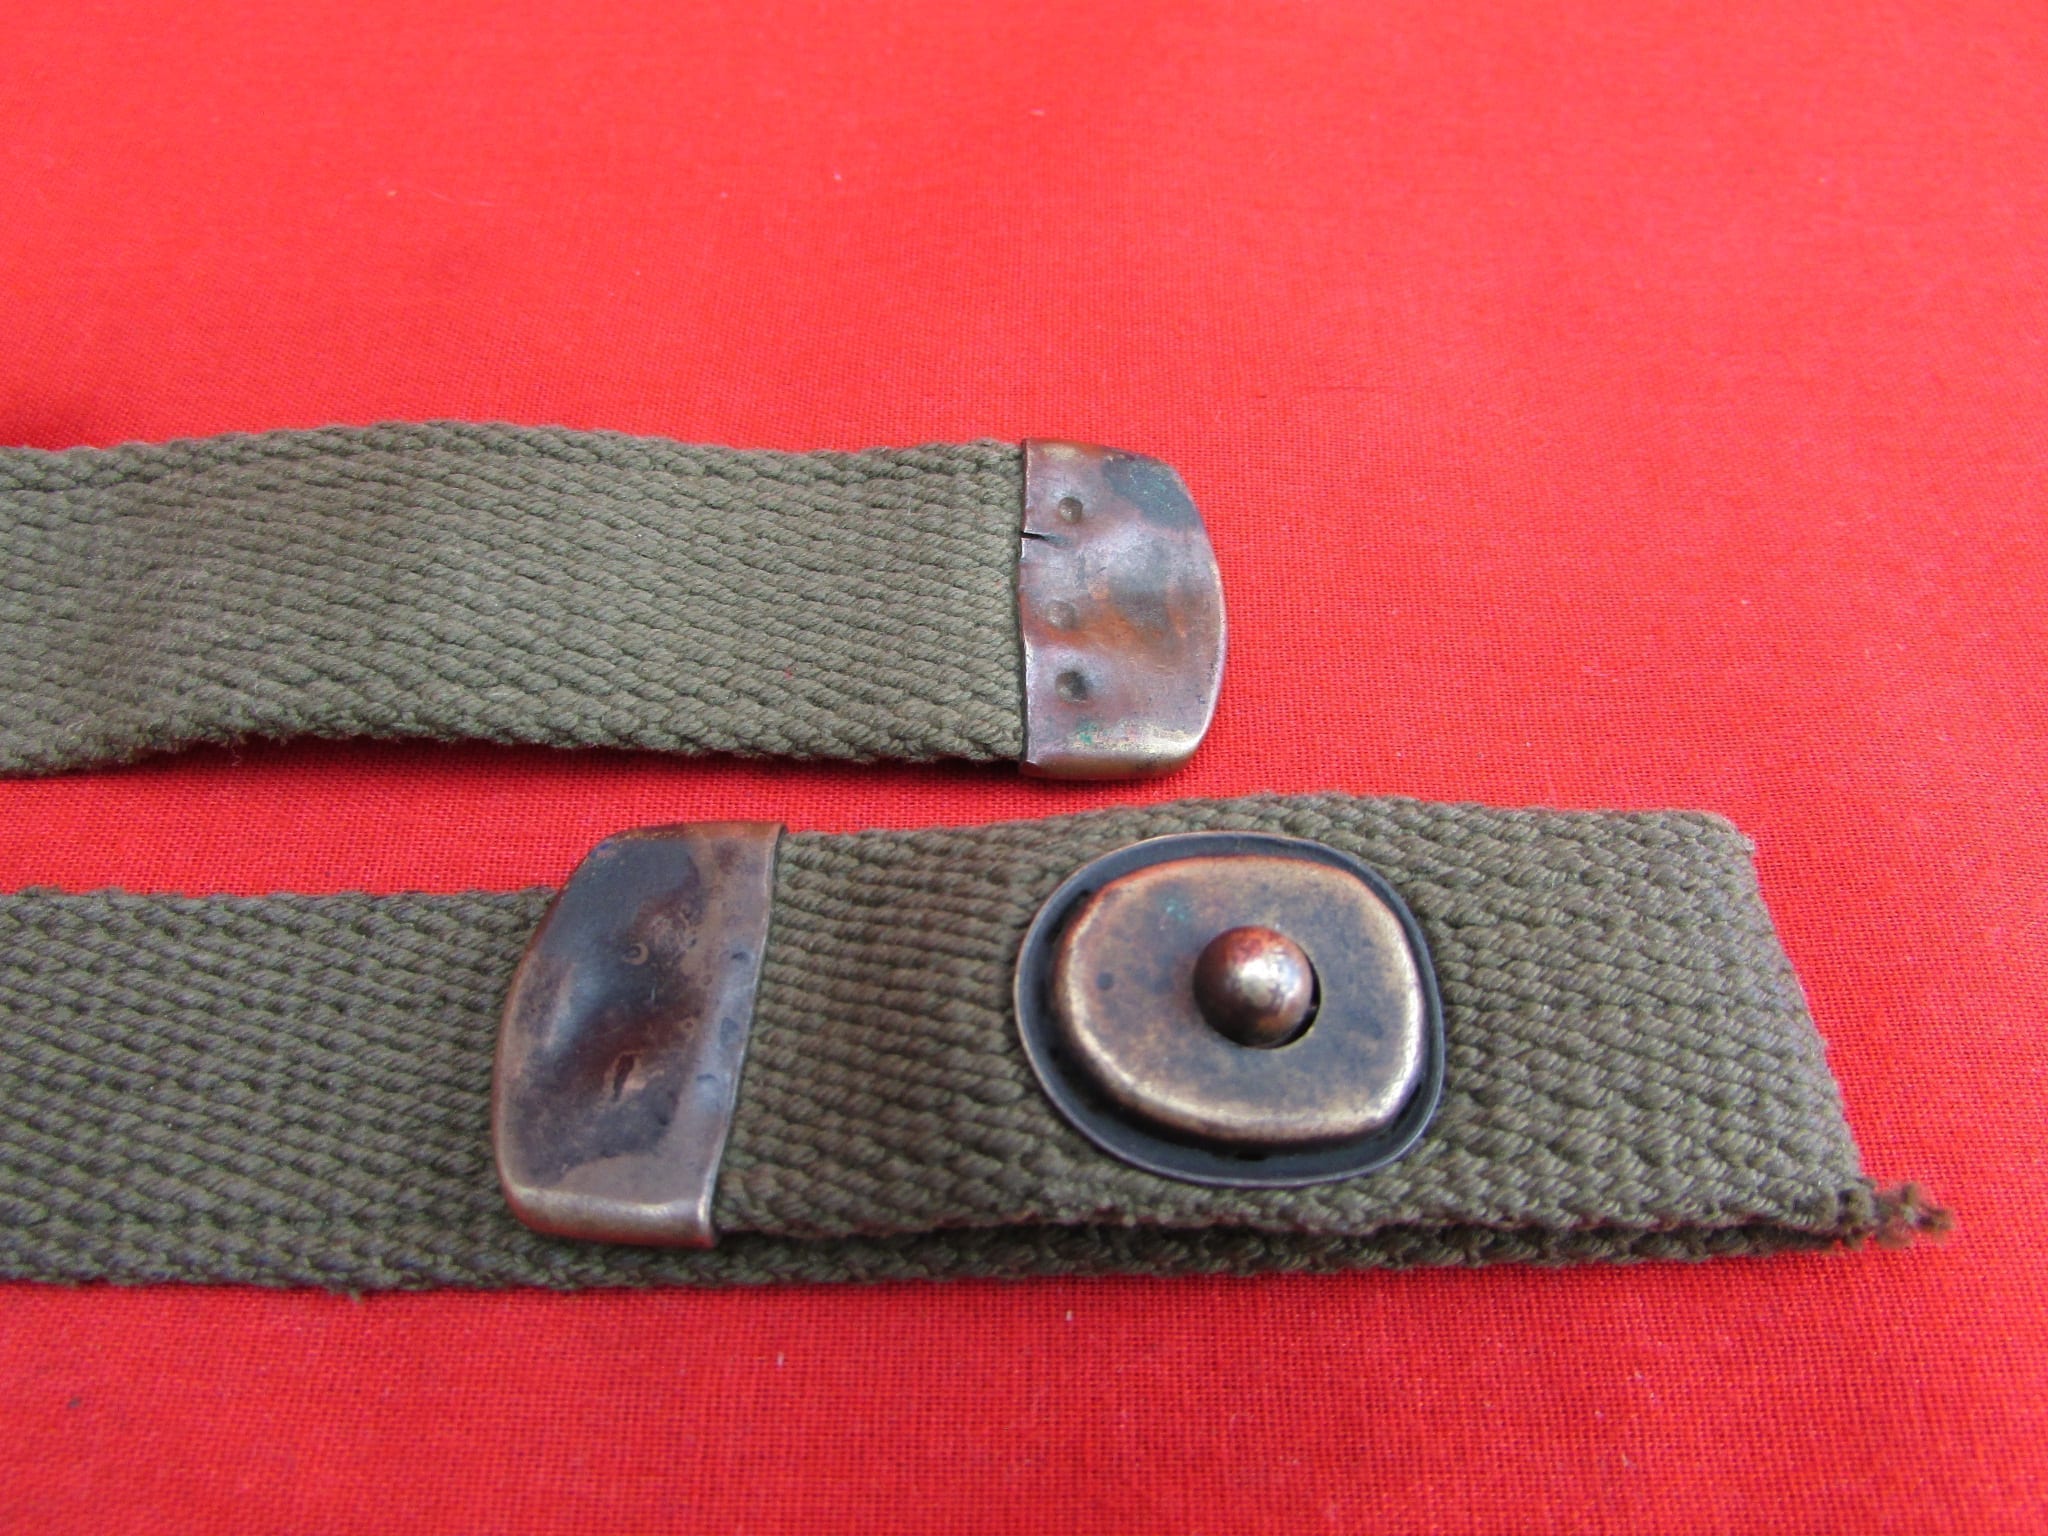 Sling,M1, US Carbine | Midwest Military Collectibles